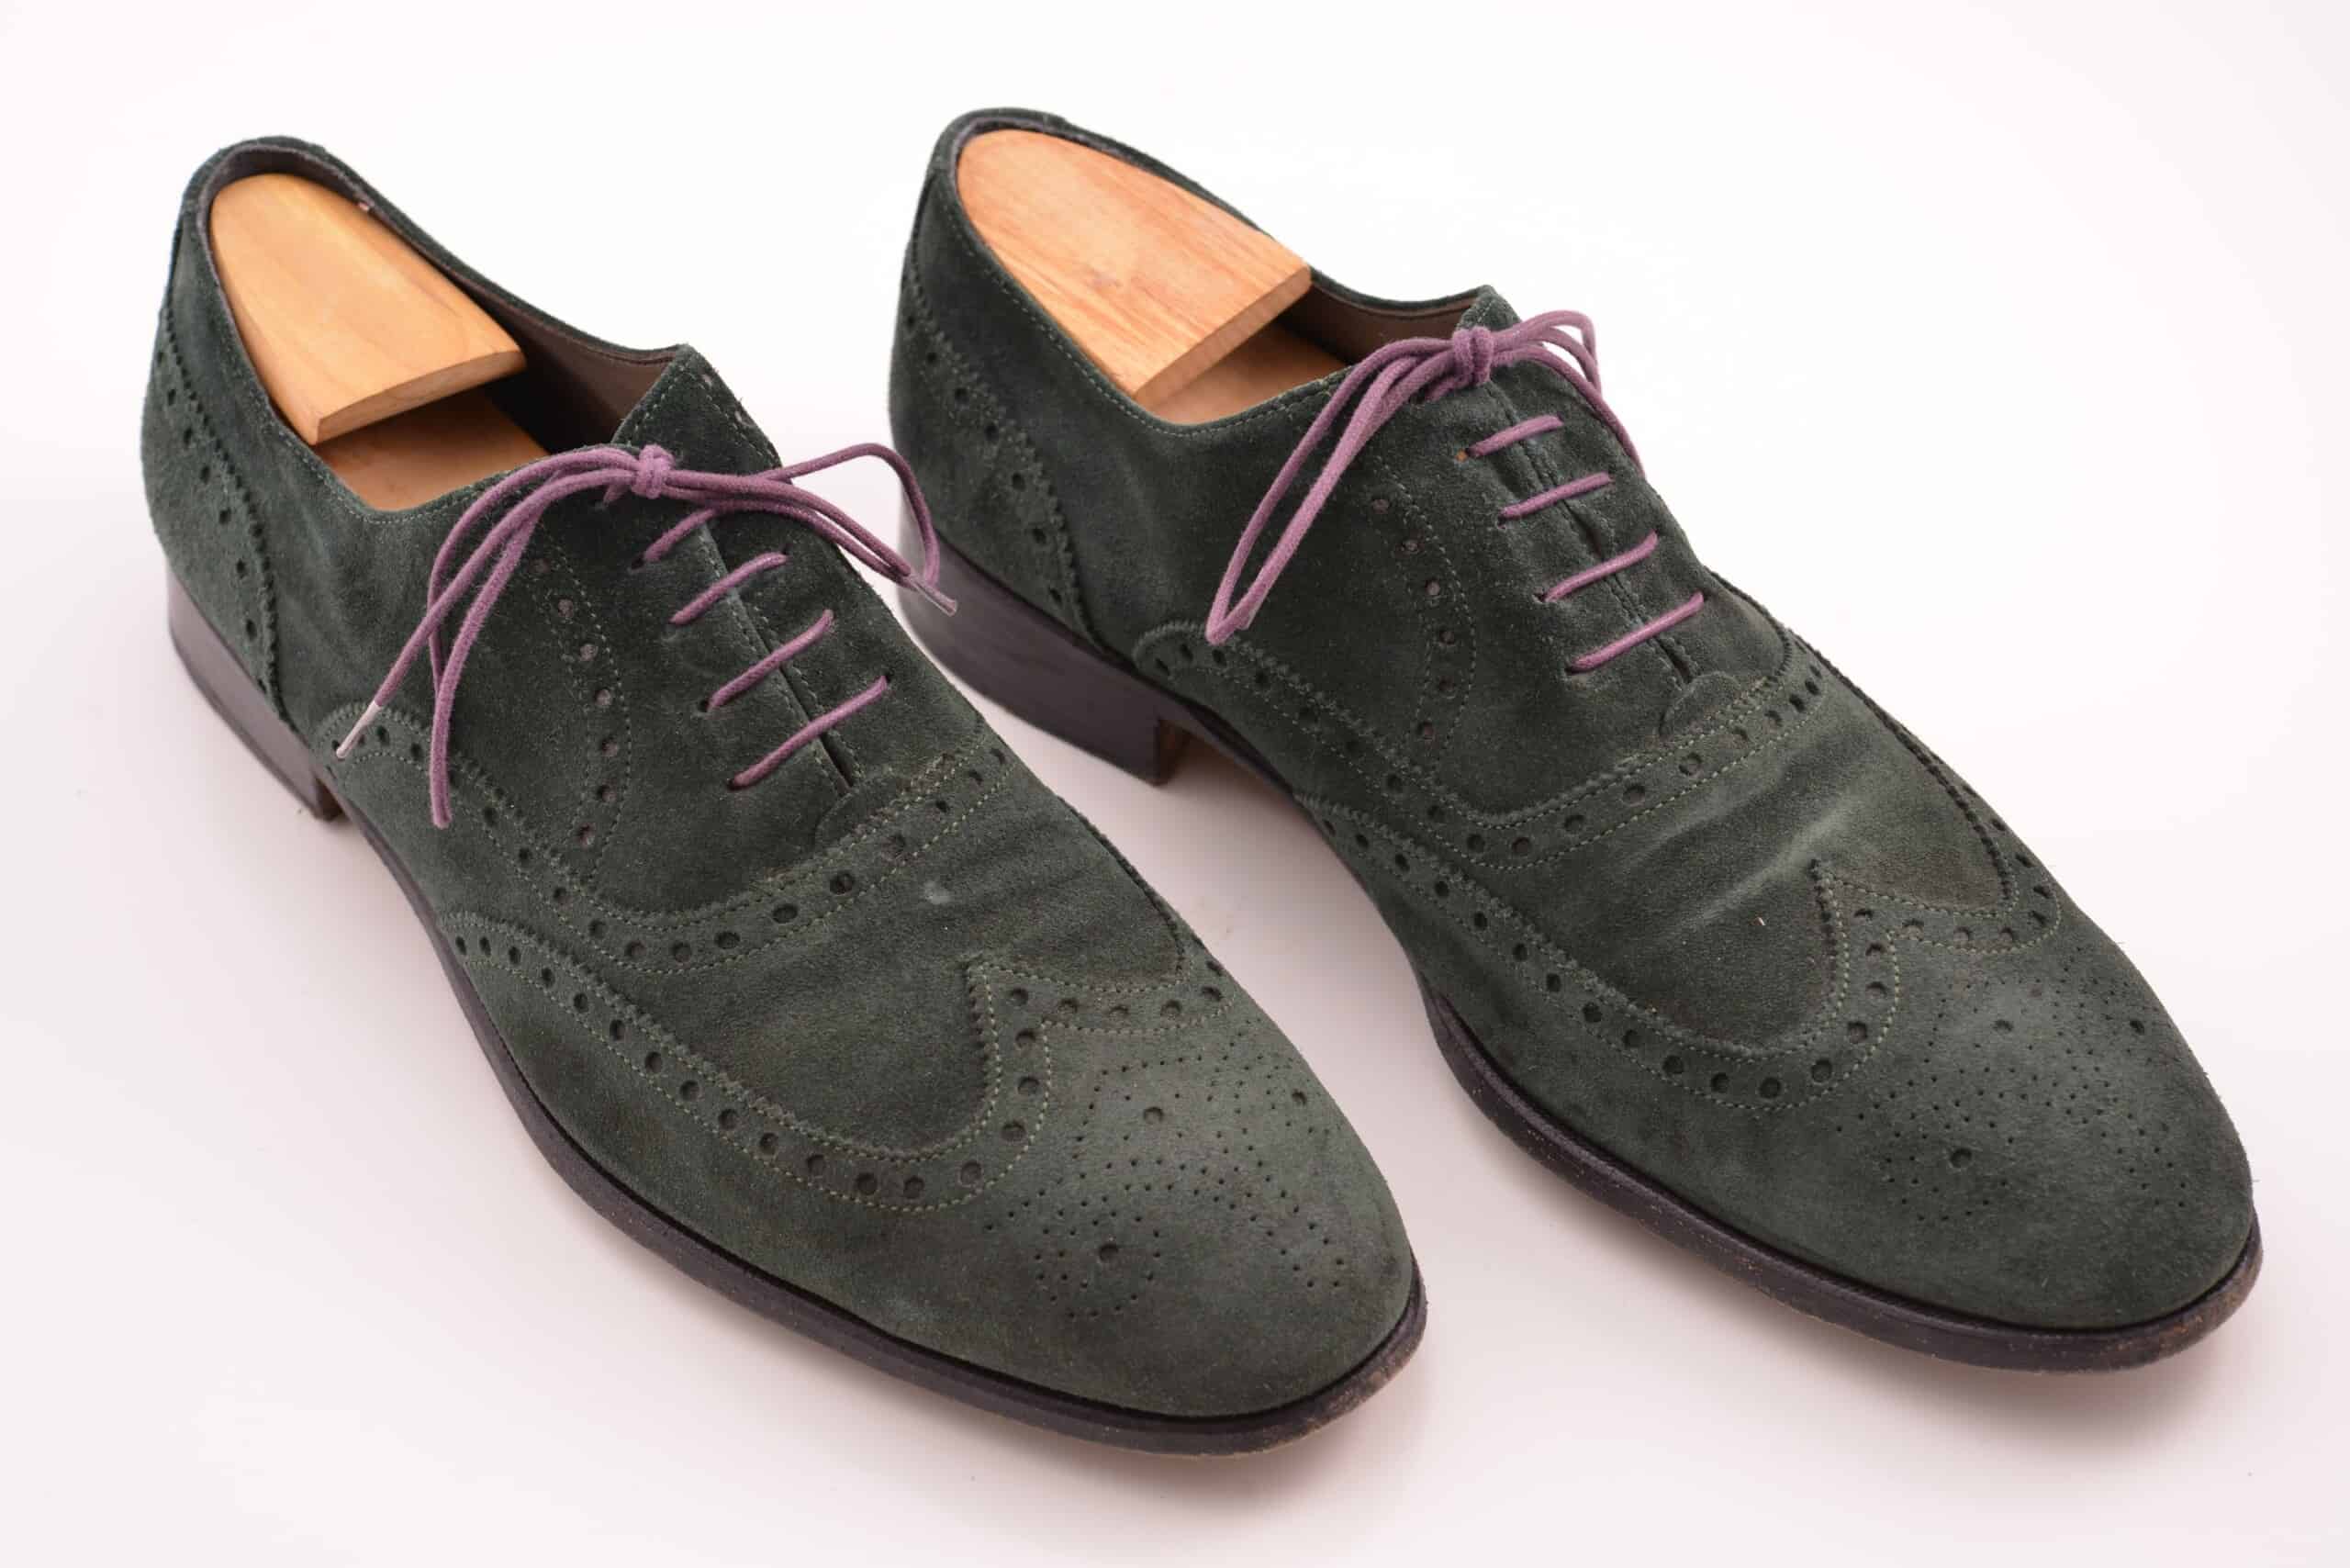 Green suede wingtip Oxfords with magenta laces